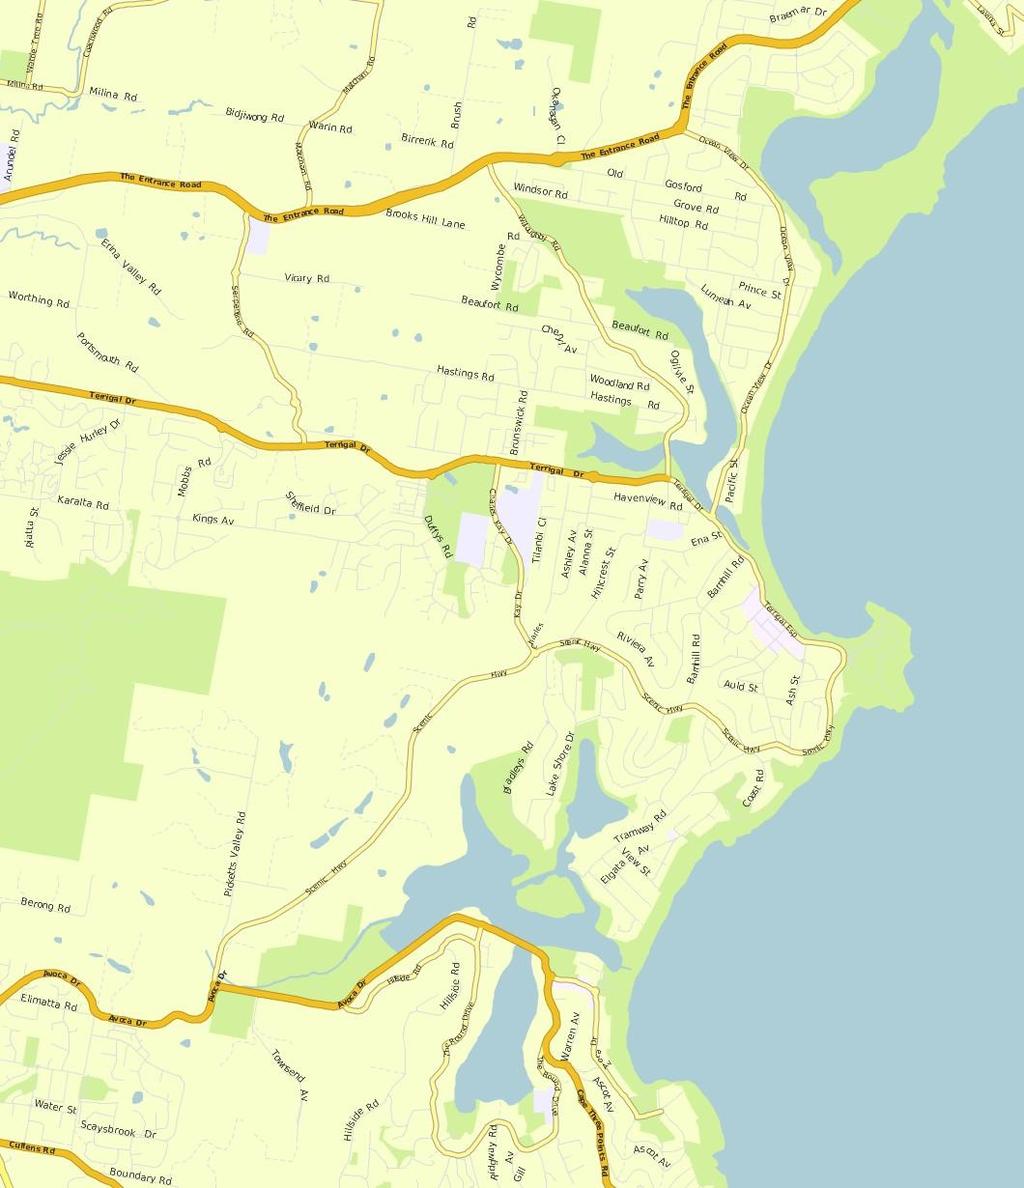 TERRIGAL - Suburb Map Prepared on /0/08 by Shaun Hudson-Smith, +6 6 8 00 at Ray White Terrigal. Property Data Solutions Pty Ltd 08 (pricefinder.com.